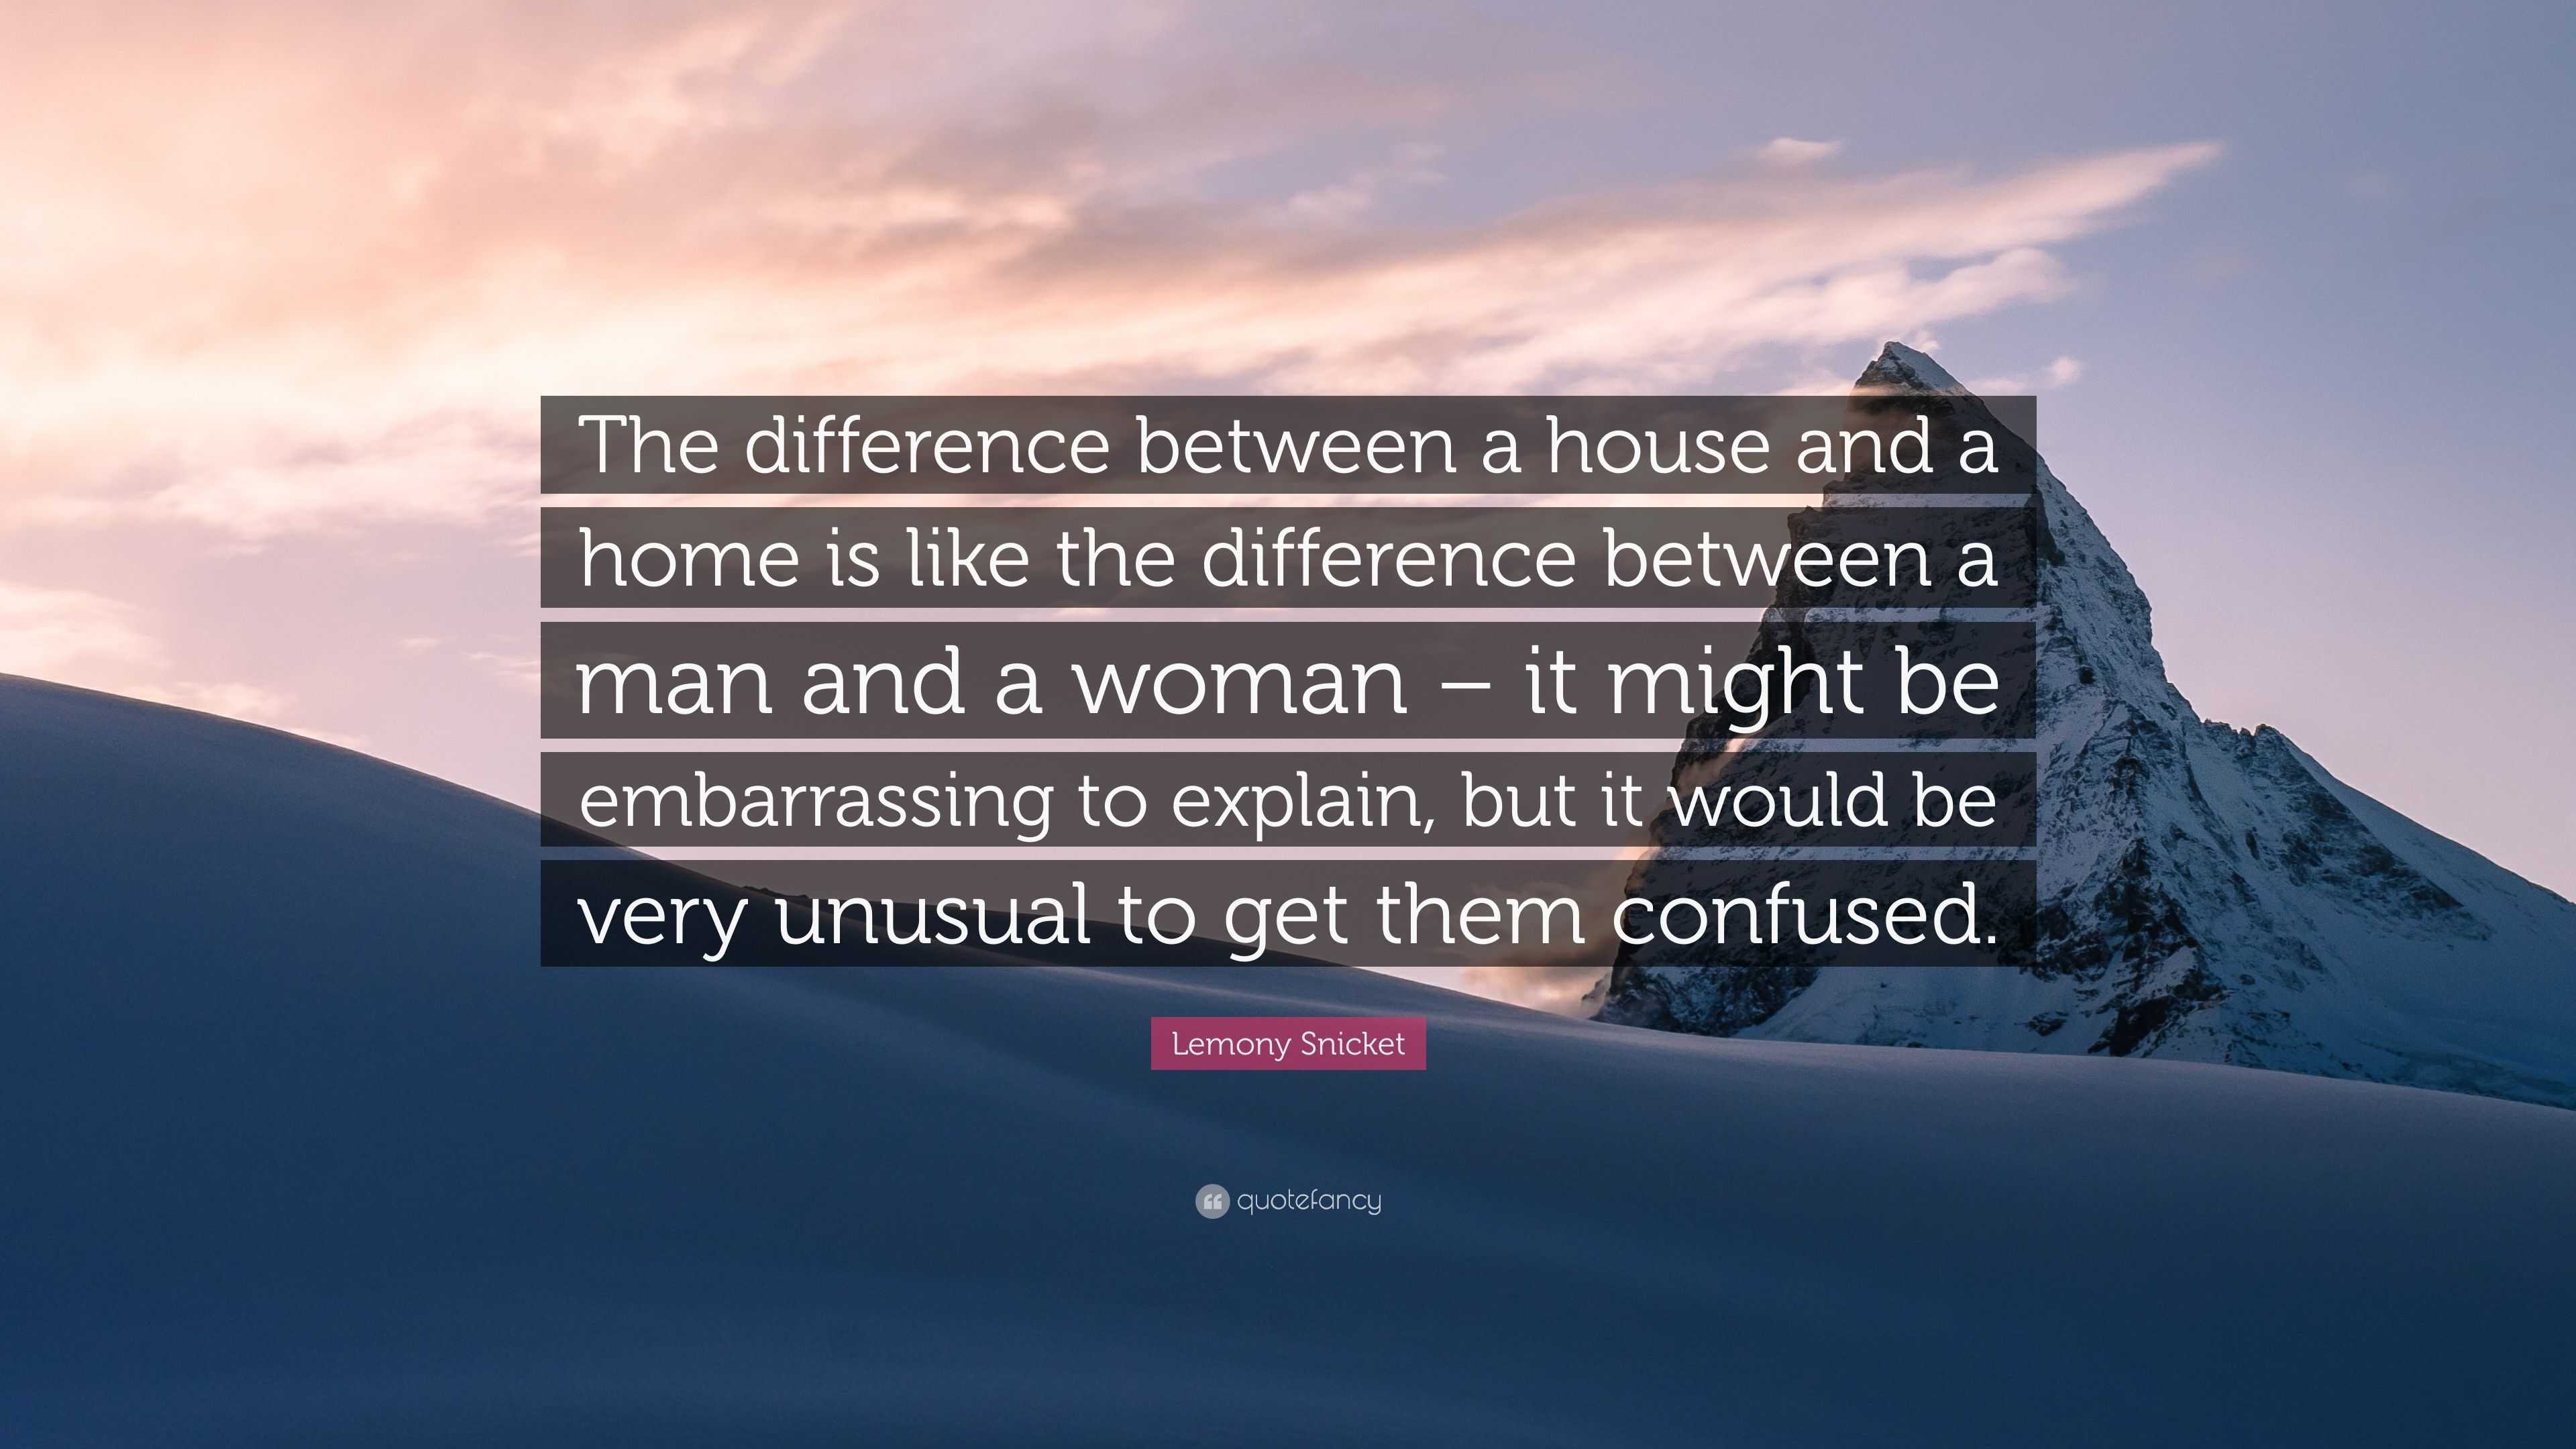 Lemony Snicket Quote: “The difference between a house and a home is ...